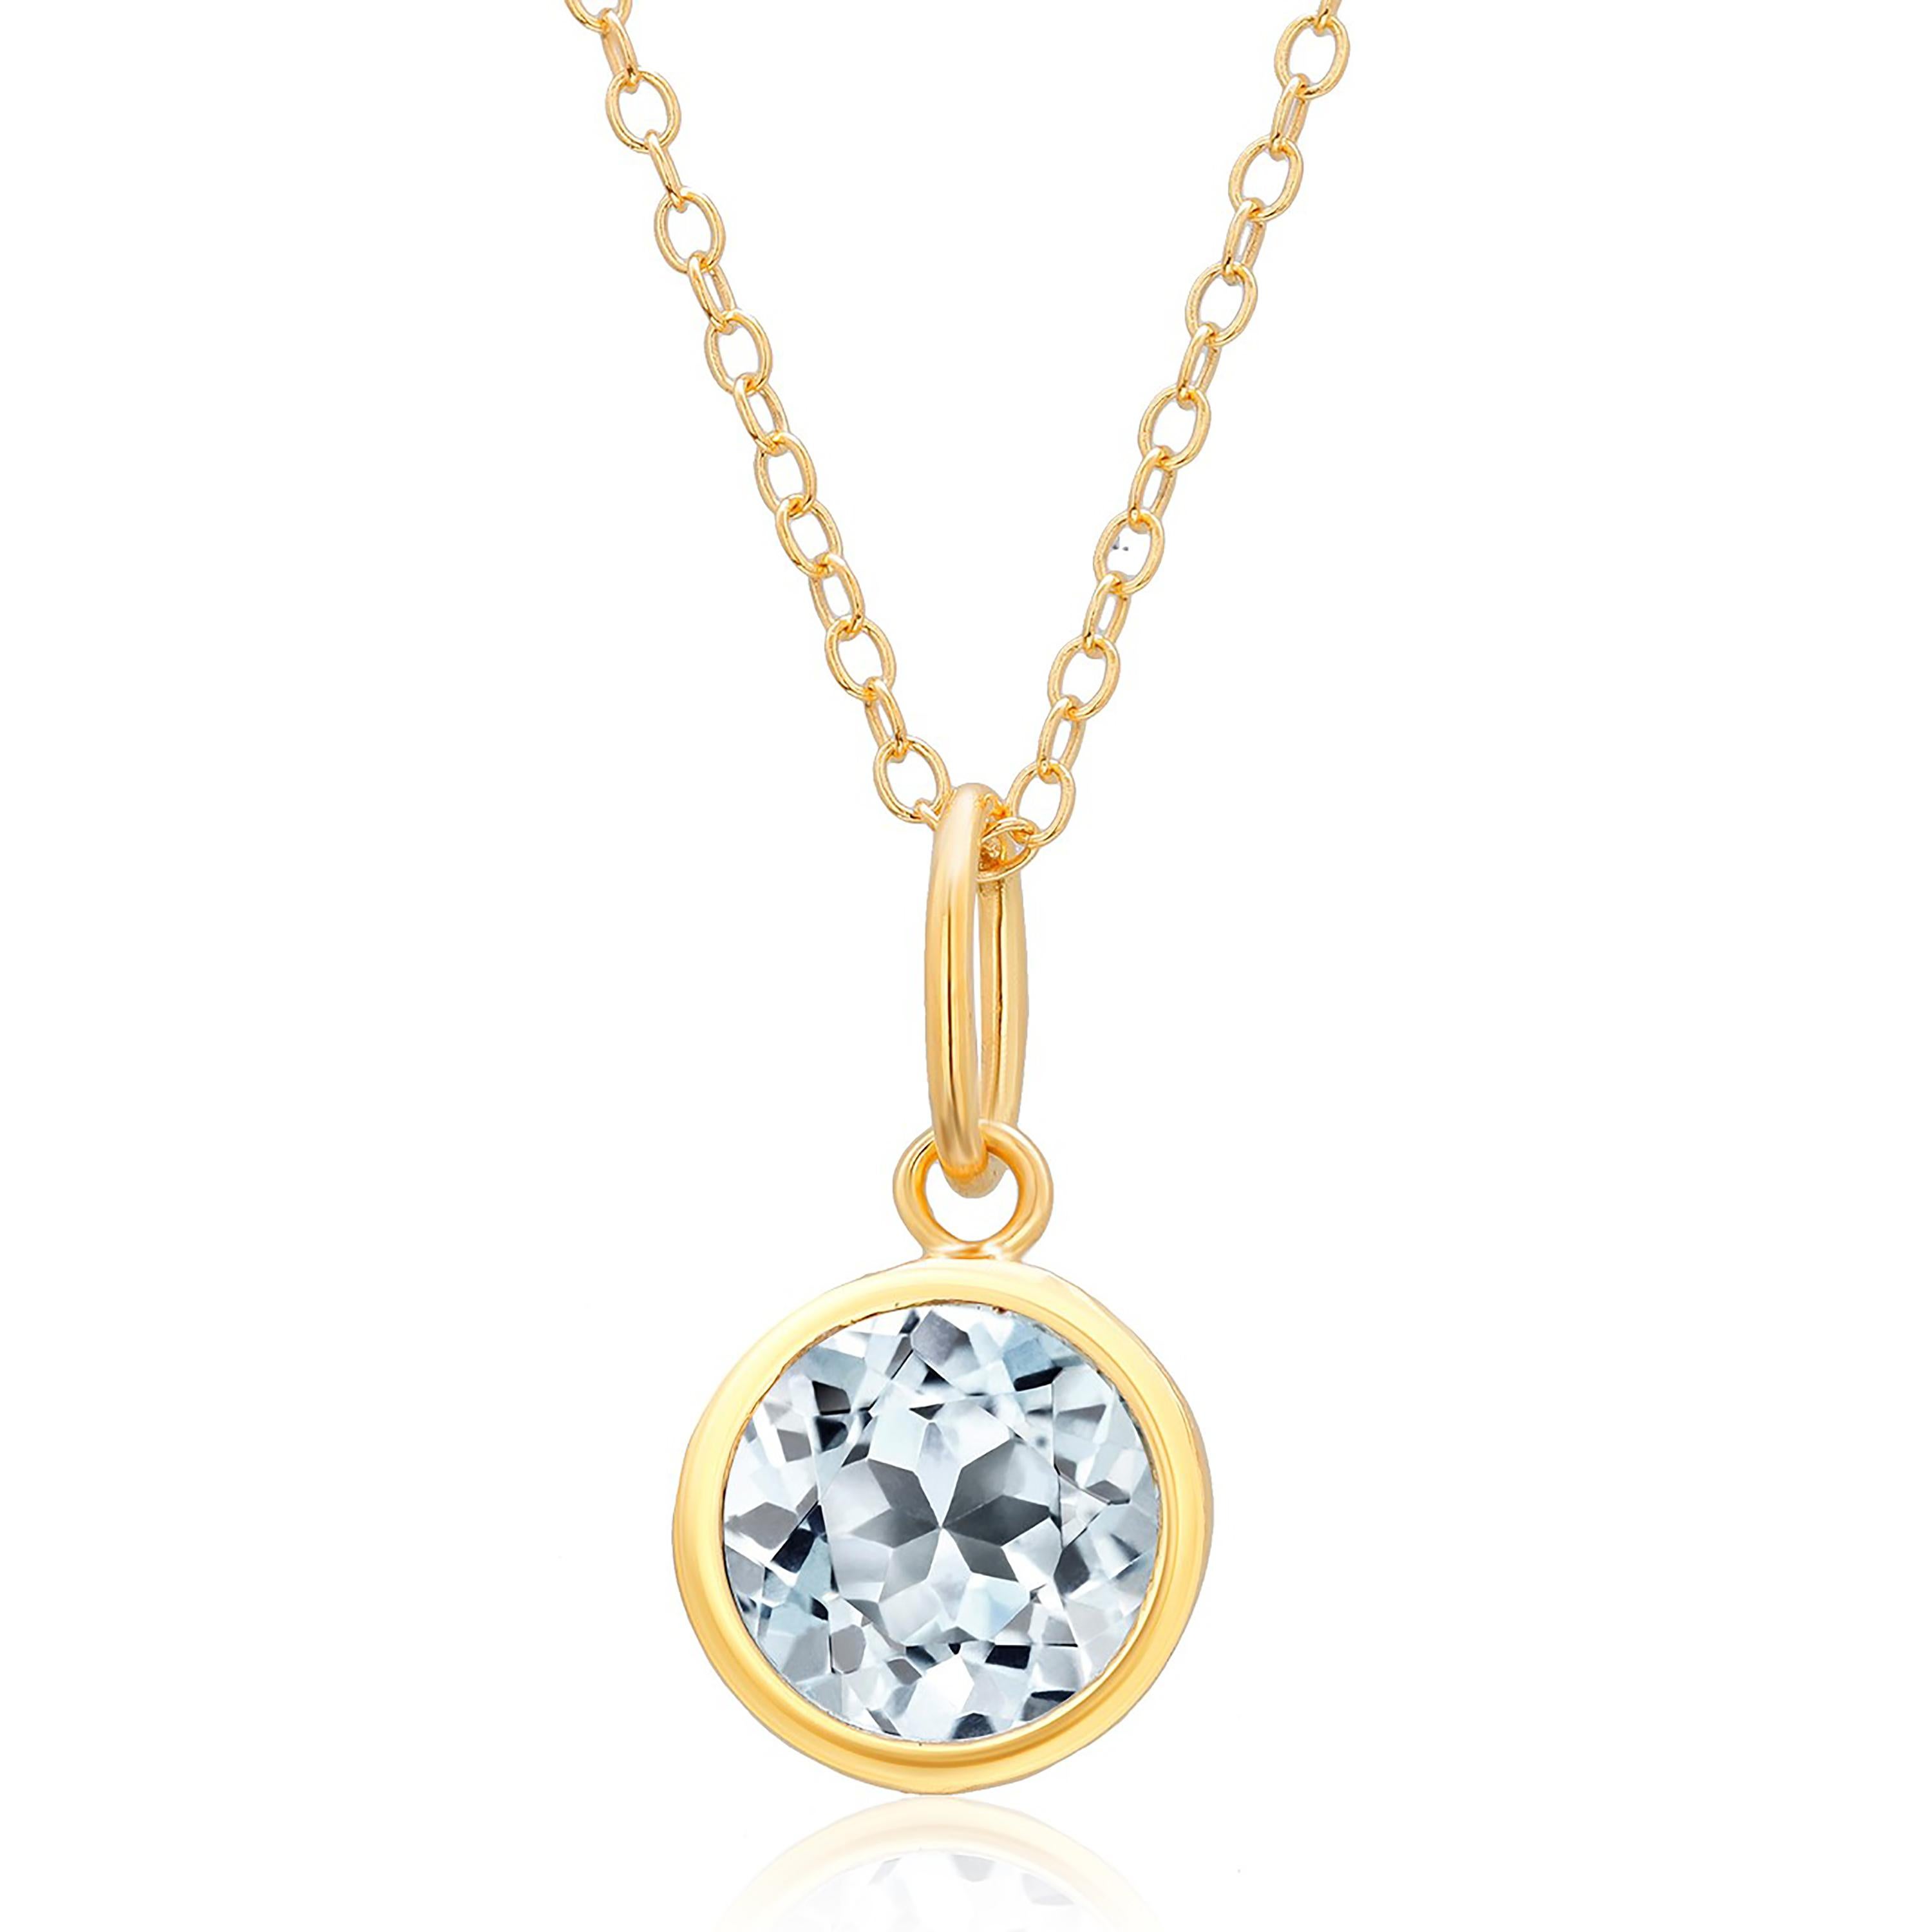 Contemporary Round Blue Topaz Bezel Set Silver Pendant Necklace Yellow Gold-Plated